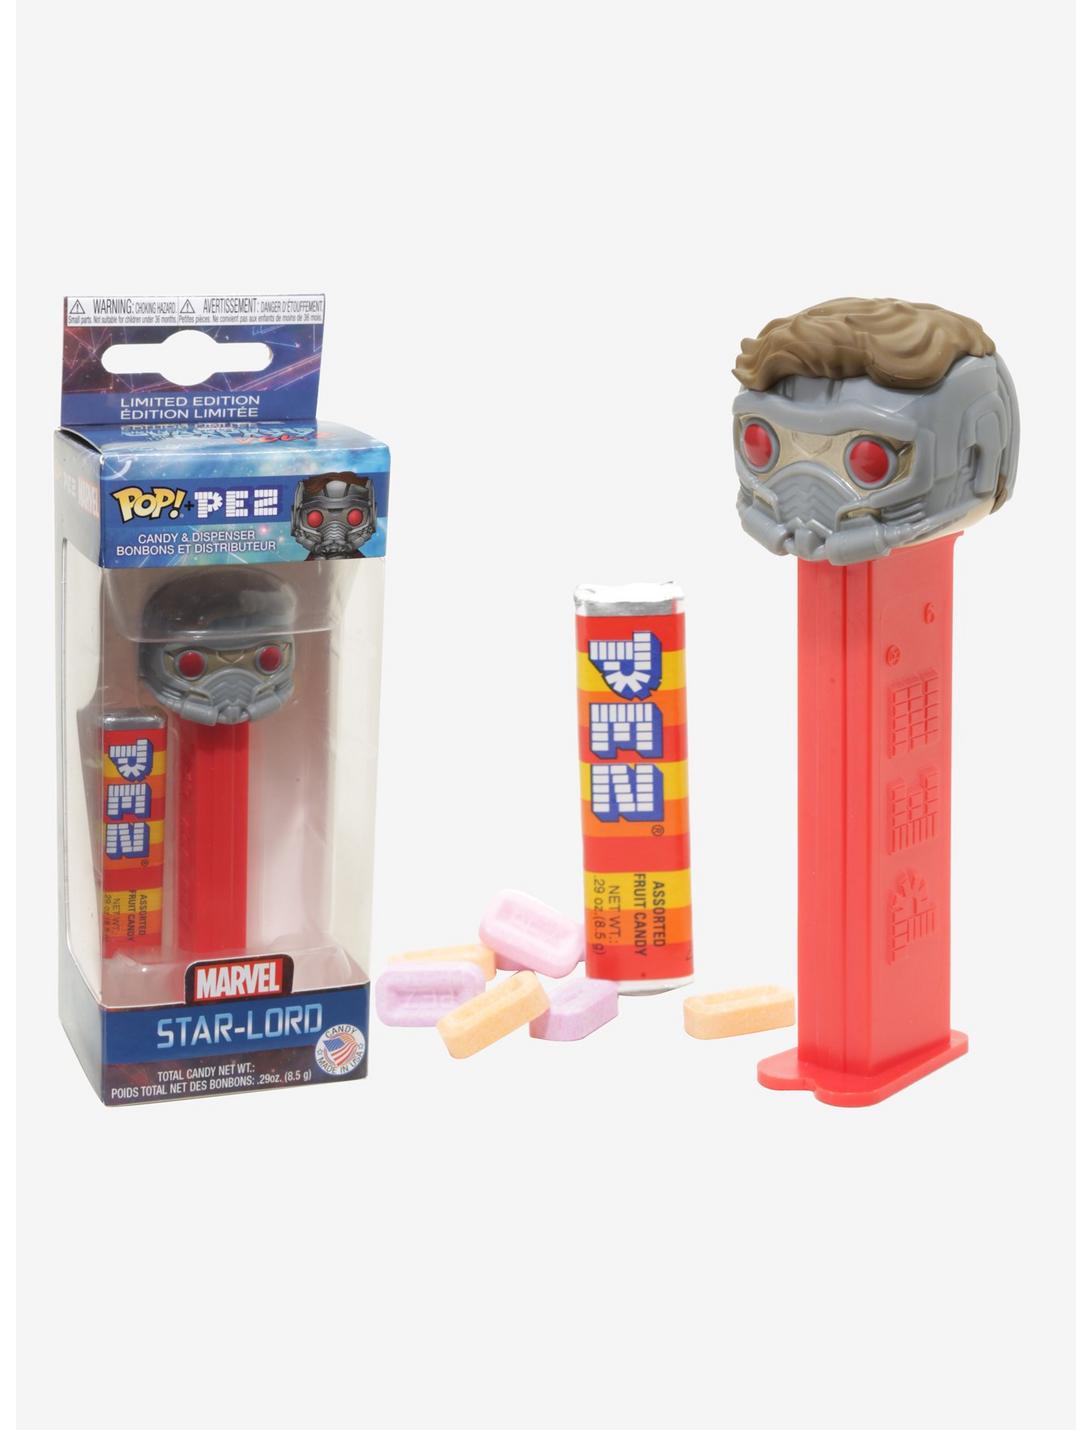 Funko Pop! PEZ Marvel Guardians Of The Galaxy Vol. 2 Star-Lord Candy & Dispenser, , hi-res